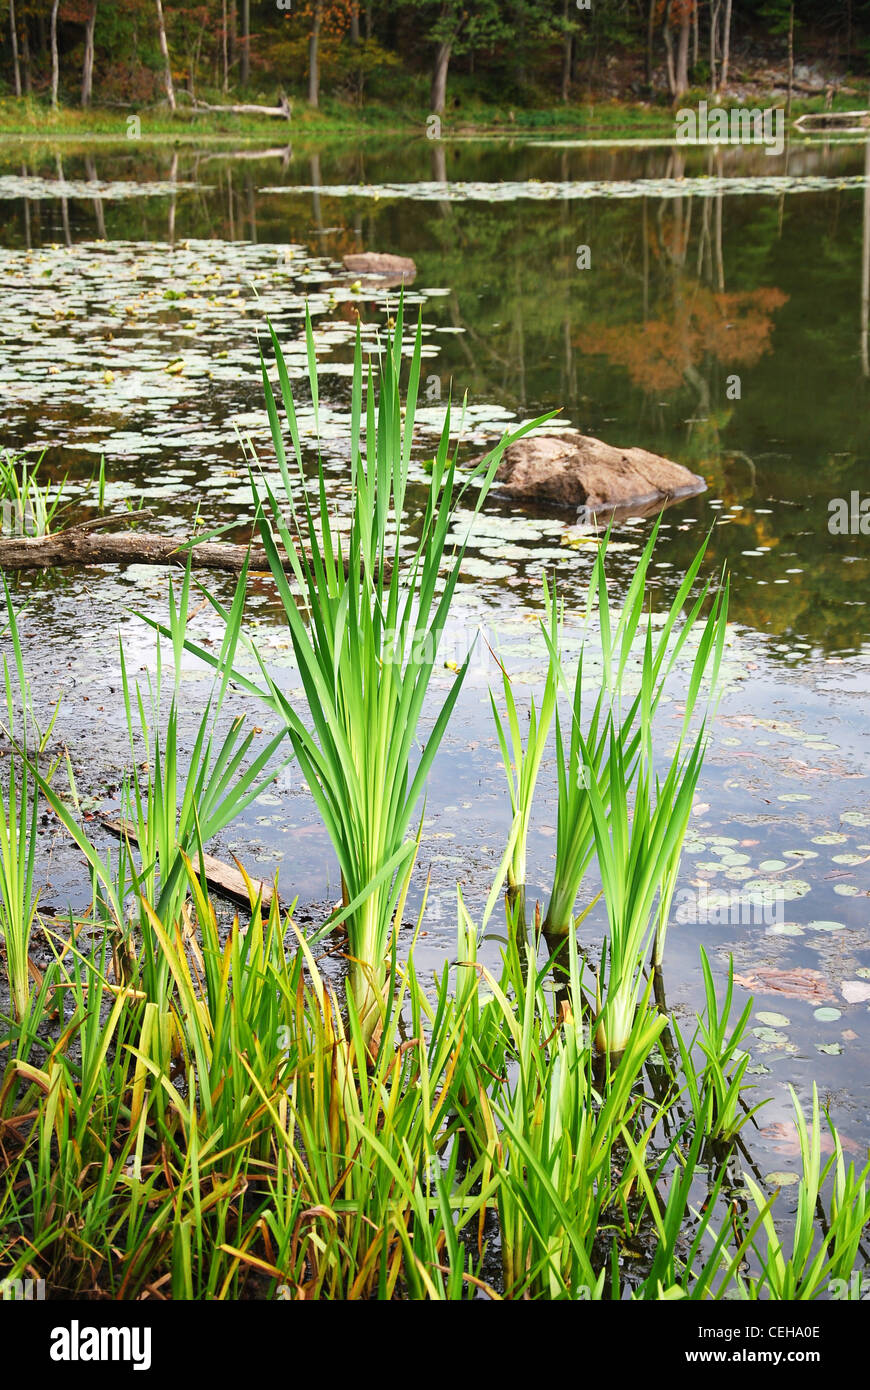 plant,cane,reed,swamp,grass,lake,lily,moss,pond, Stock Photo